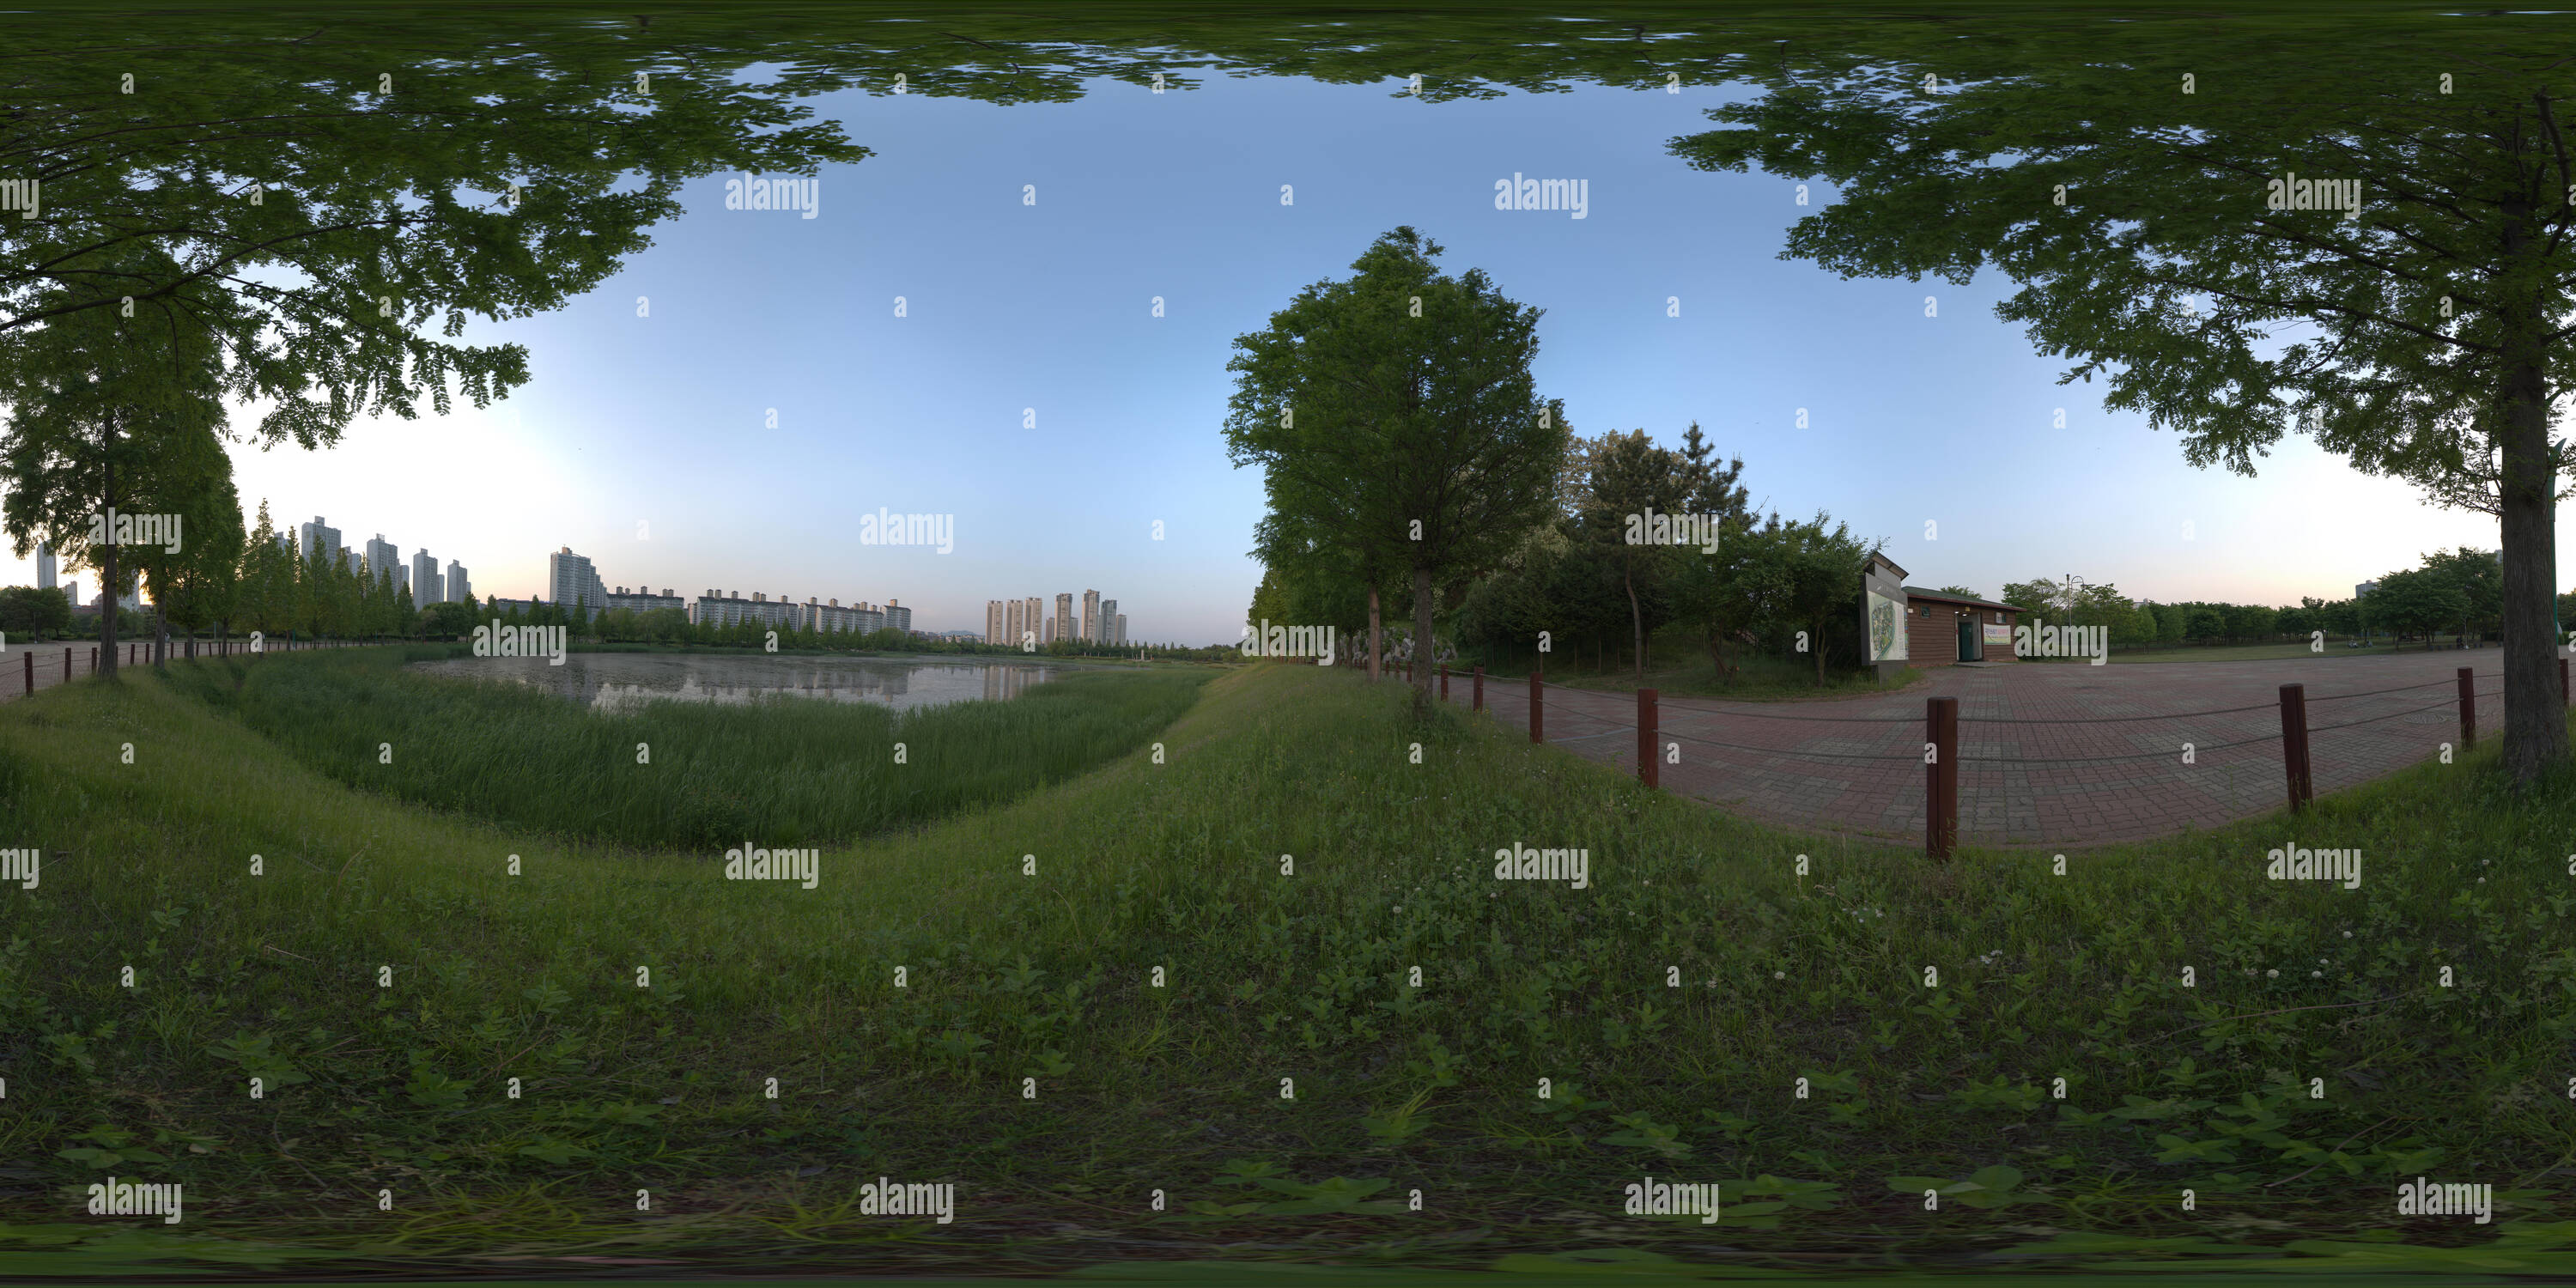 360 degree panoramic view of Ansan, South Korea - 15 May 2019 Ansan Waterside Park. 360 degrees spherical panorama of spring nature in forest.